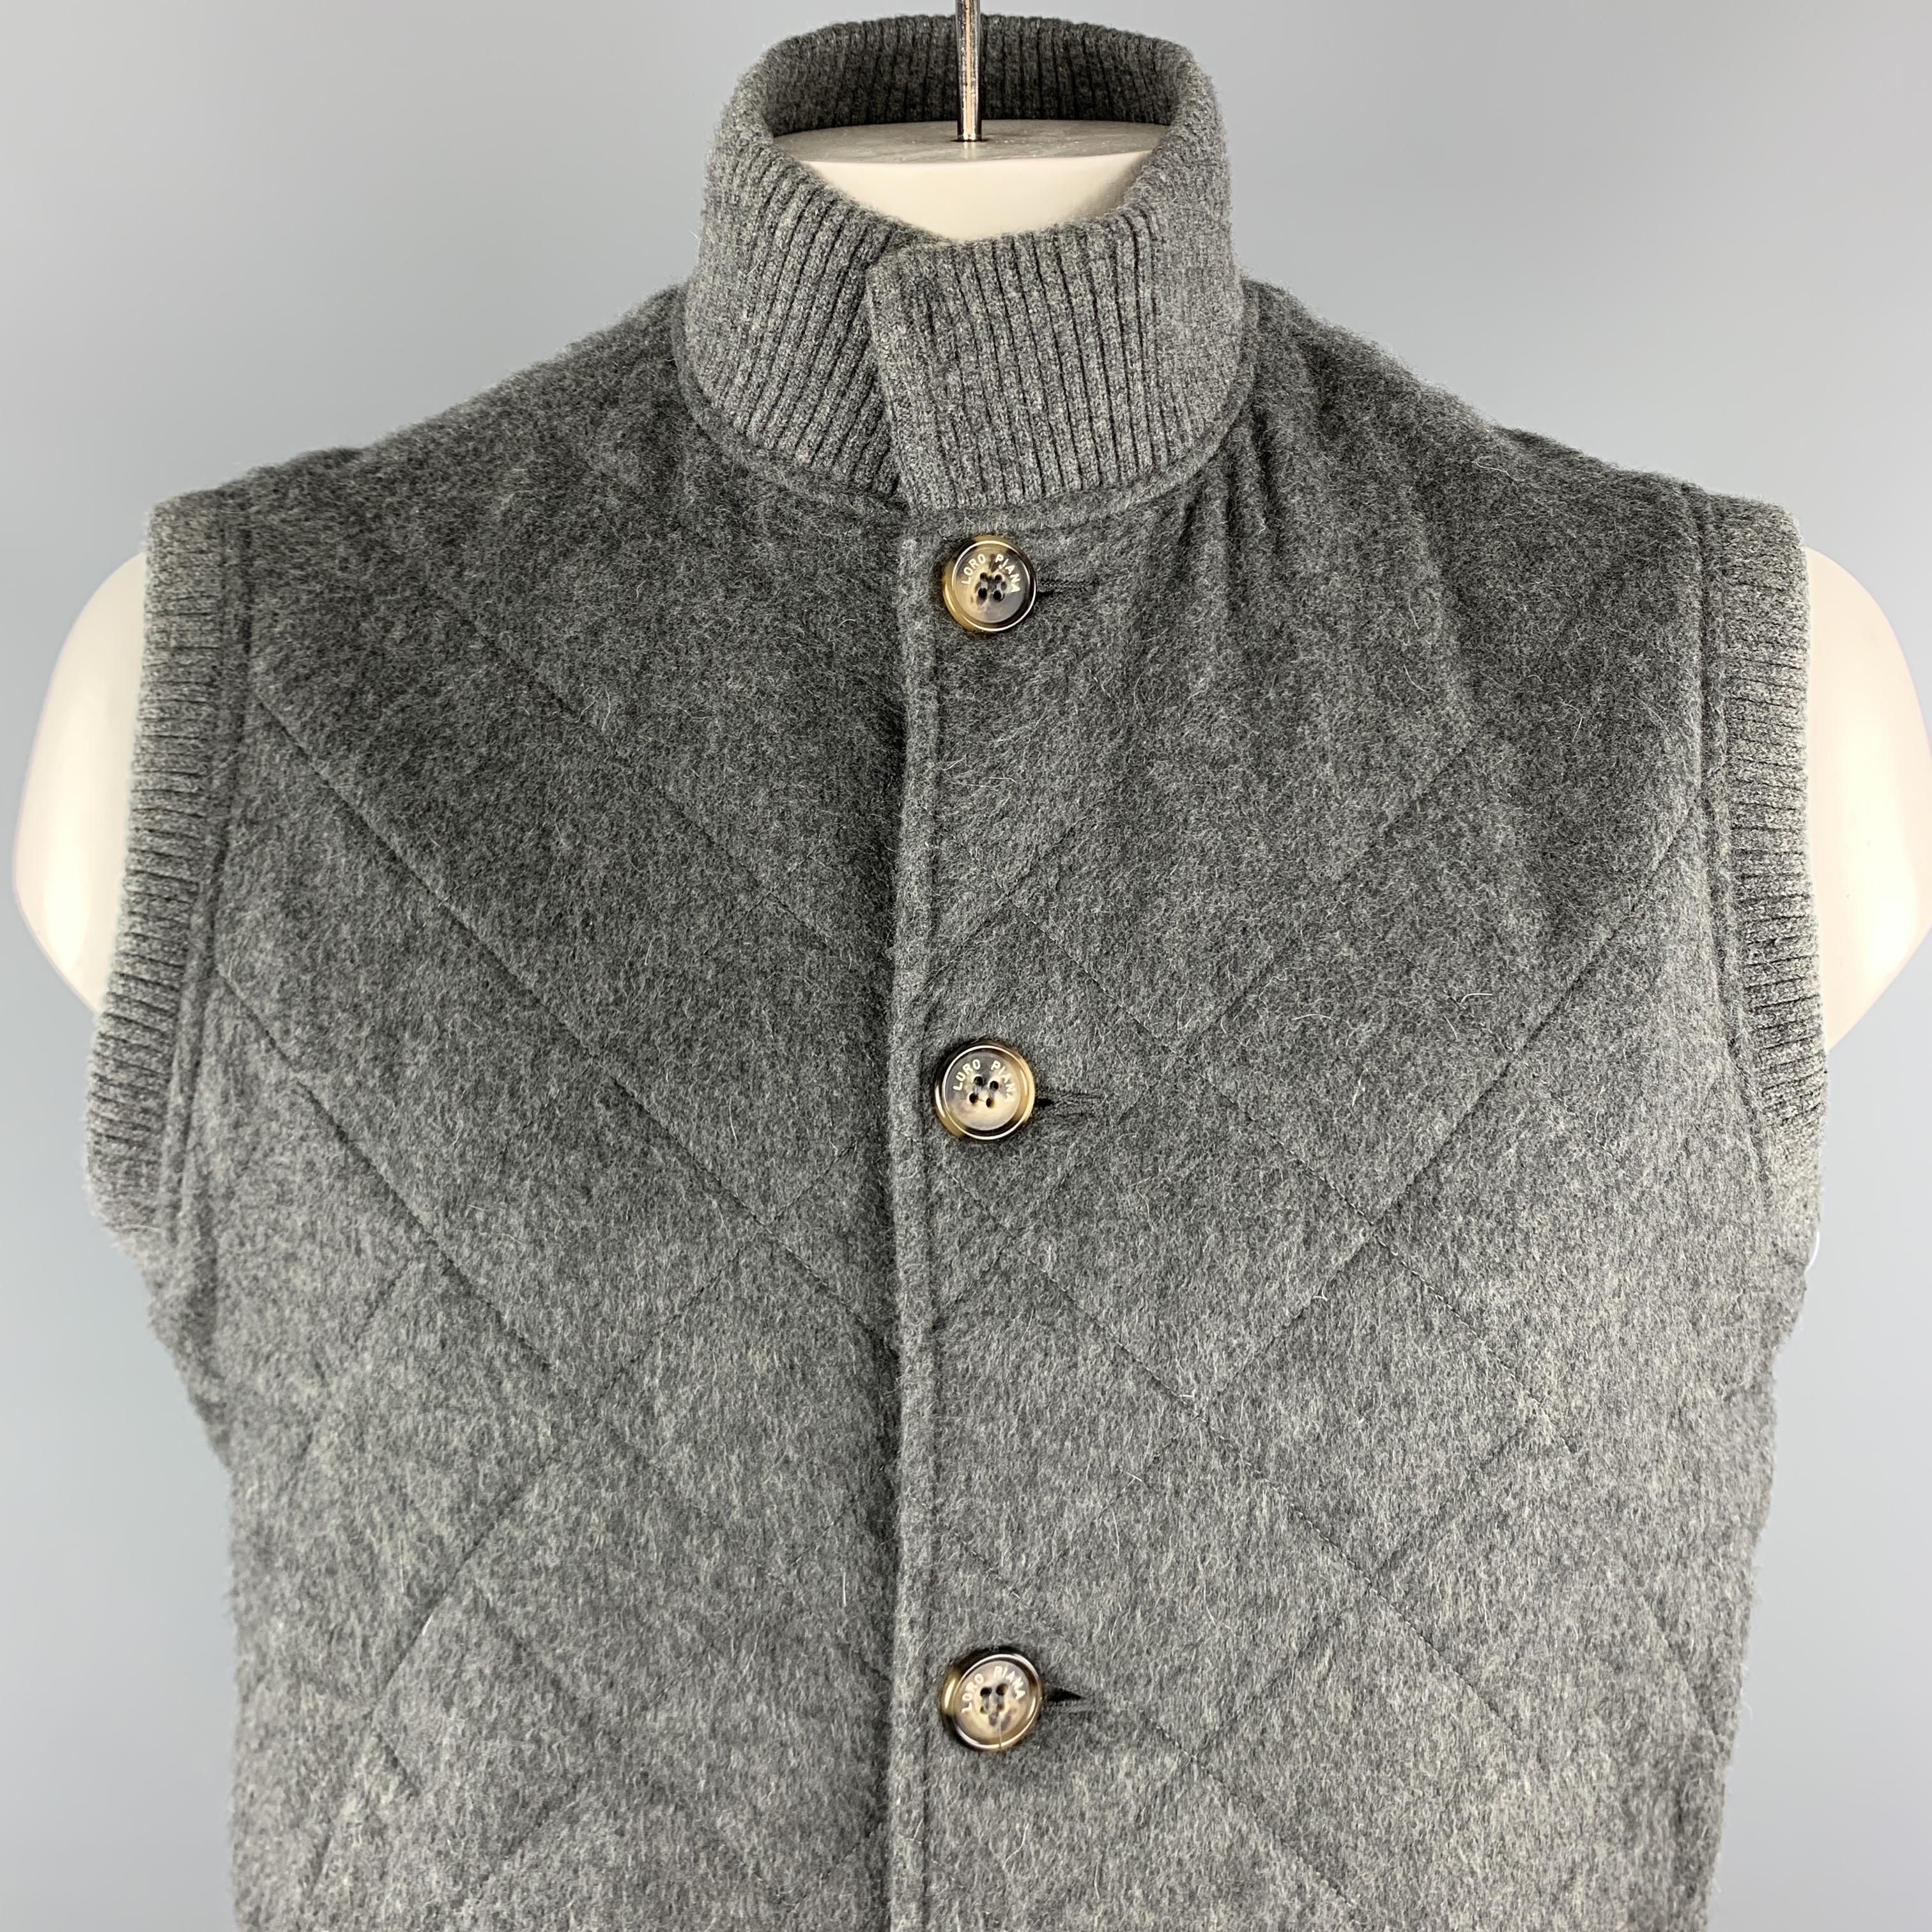 LORO PIANA Vest comes in a gray quilted cashmere material, with a high collar, buttoned closure, decorative buttons at collar, slit pockets, and ribbed collar, cuffs and hem. Made in Italy.

Excellent Pre-Owned Condition.
Marked: L

Original Retail